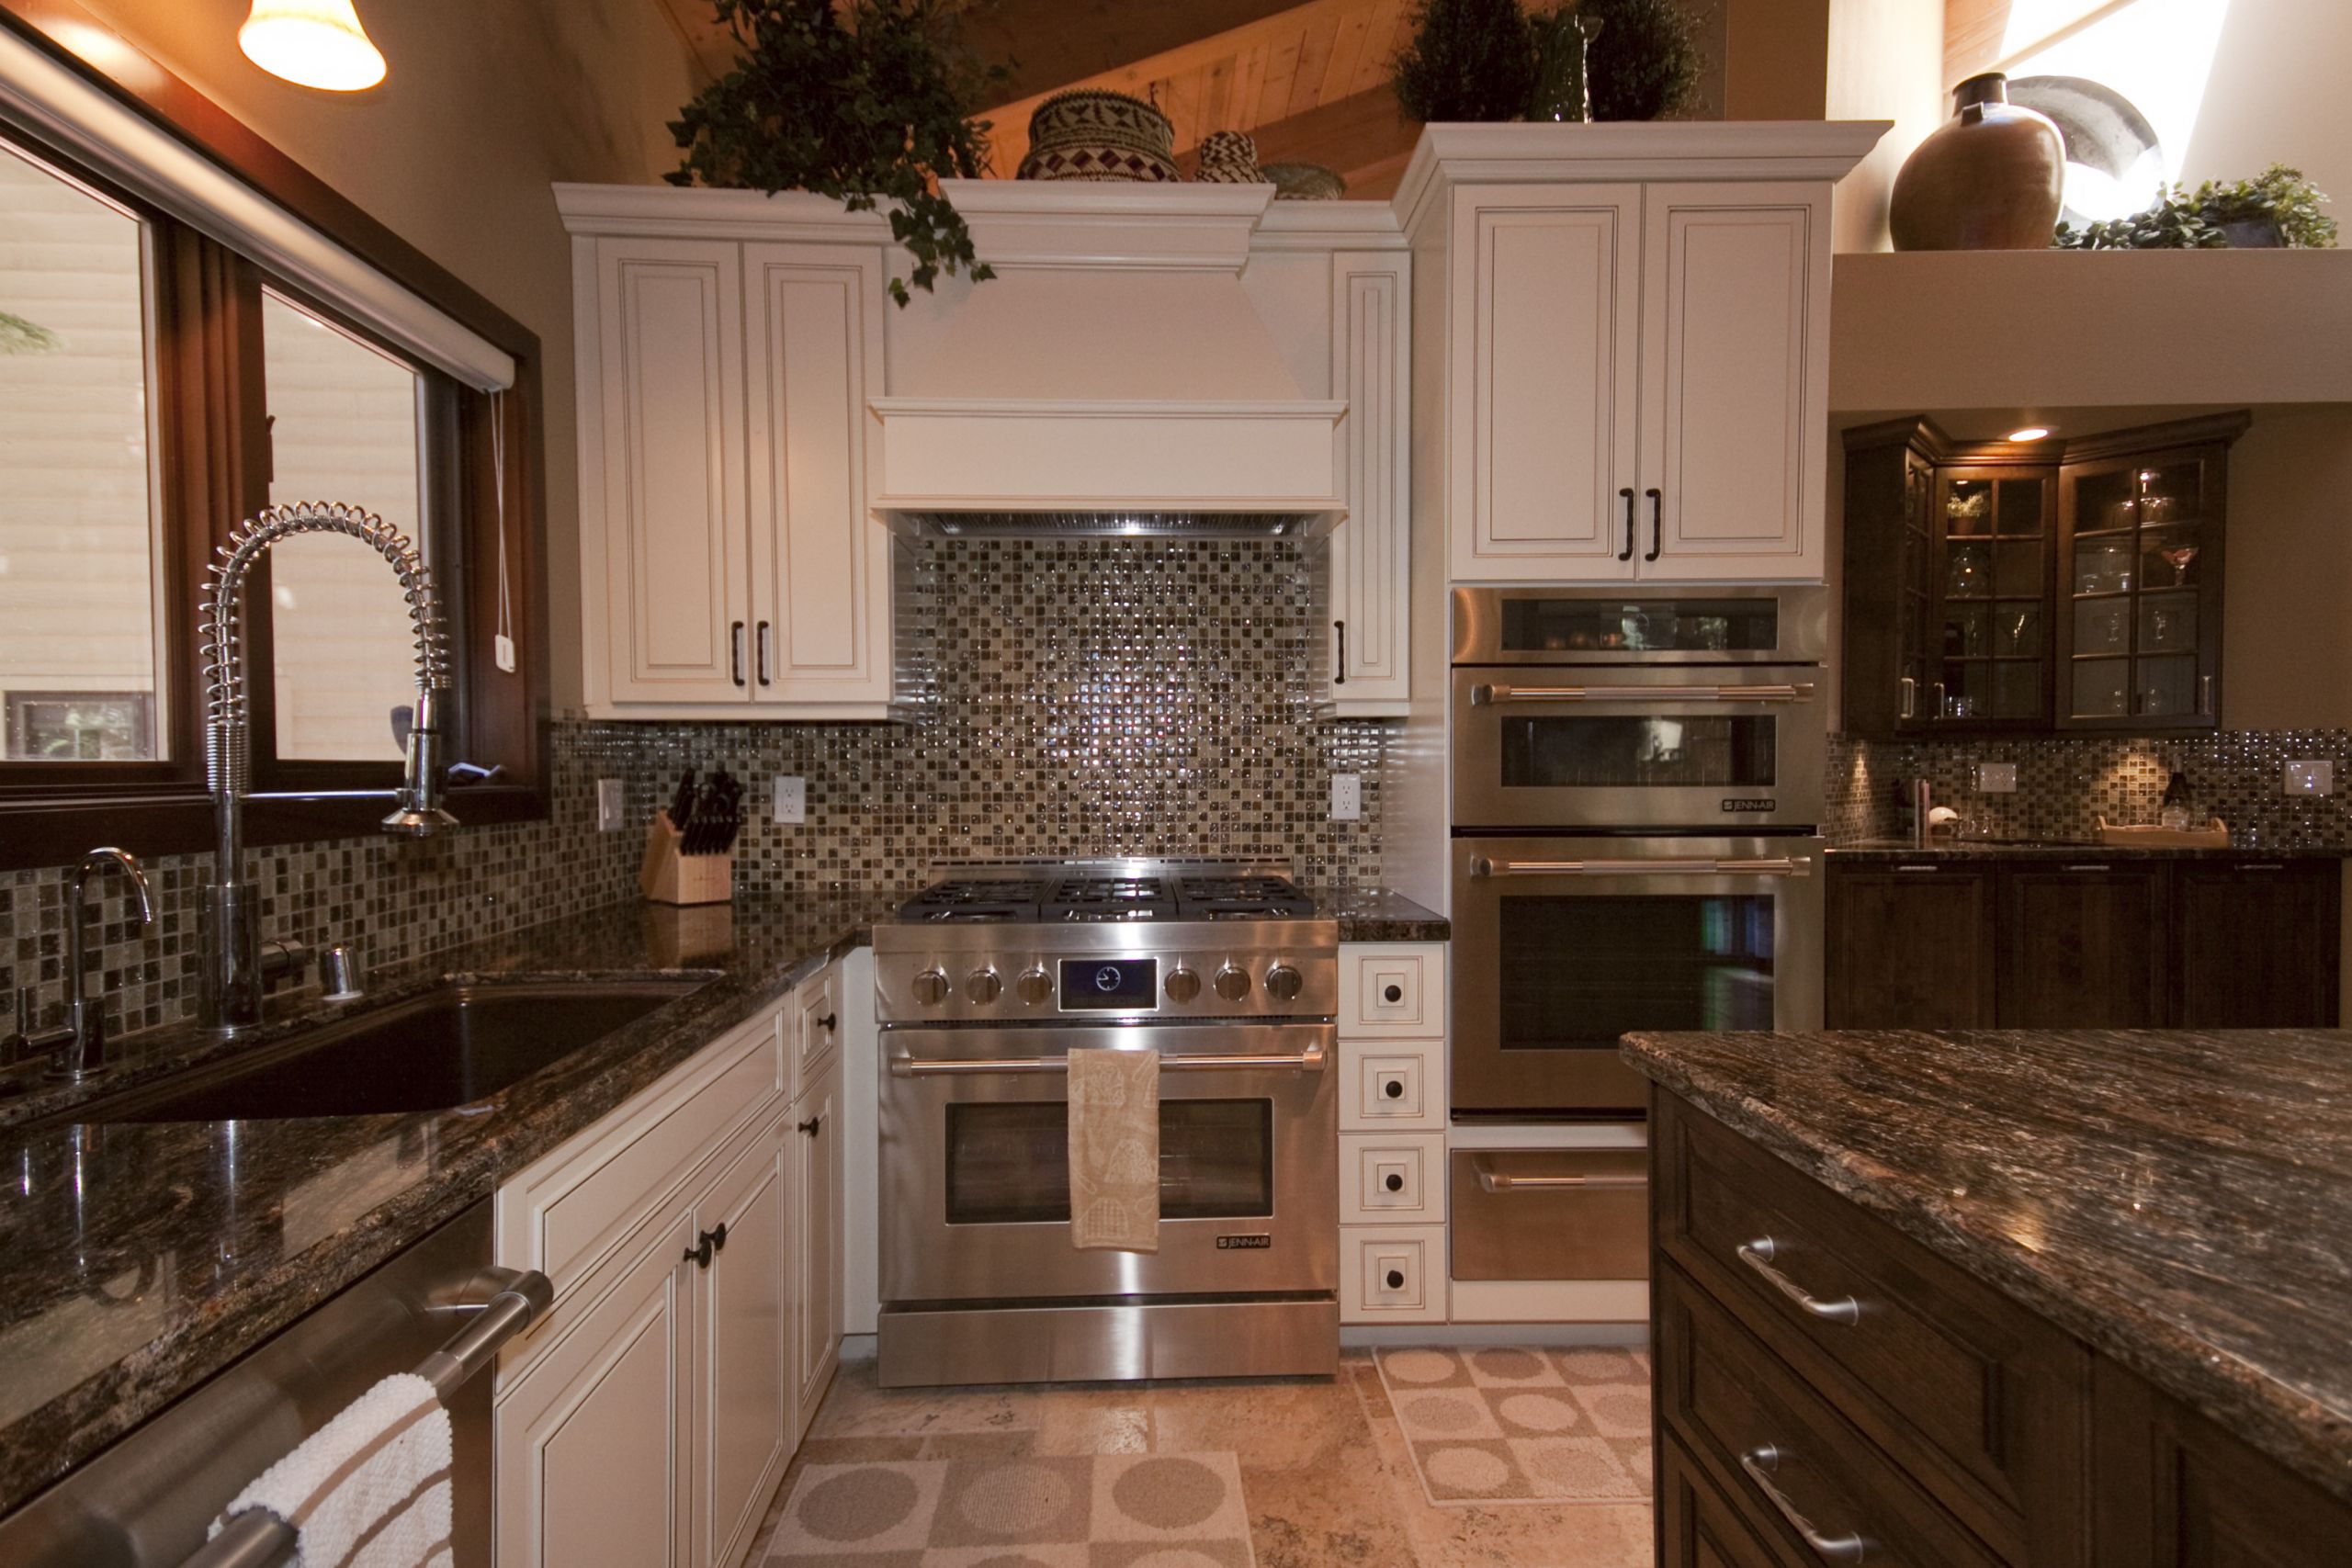 Kitchen Remodel Ideas Pictures
 Kitchen Remodeled Kitchens For Your Next